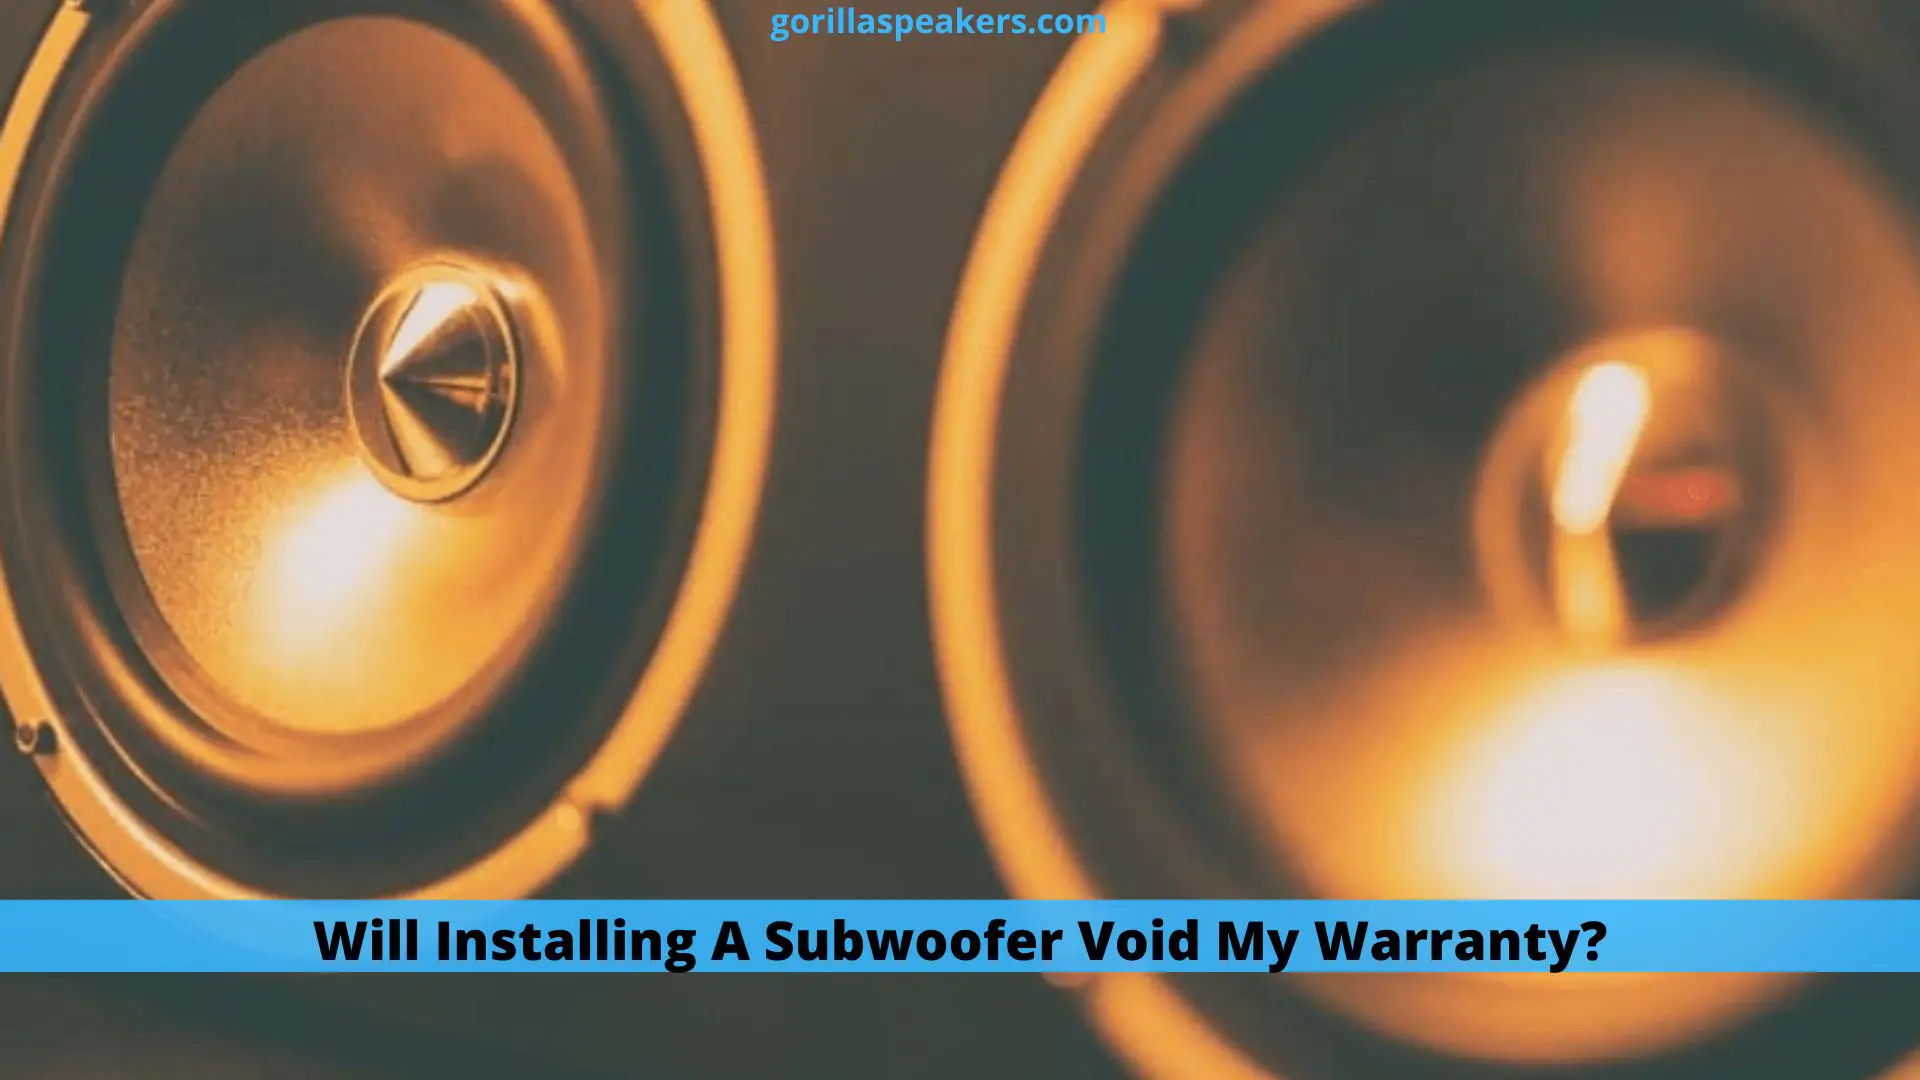 Will Installing A Subwoofer Void My Warranty?